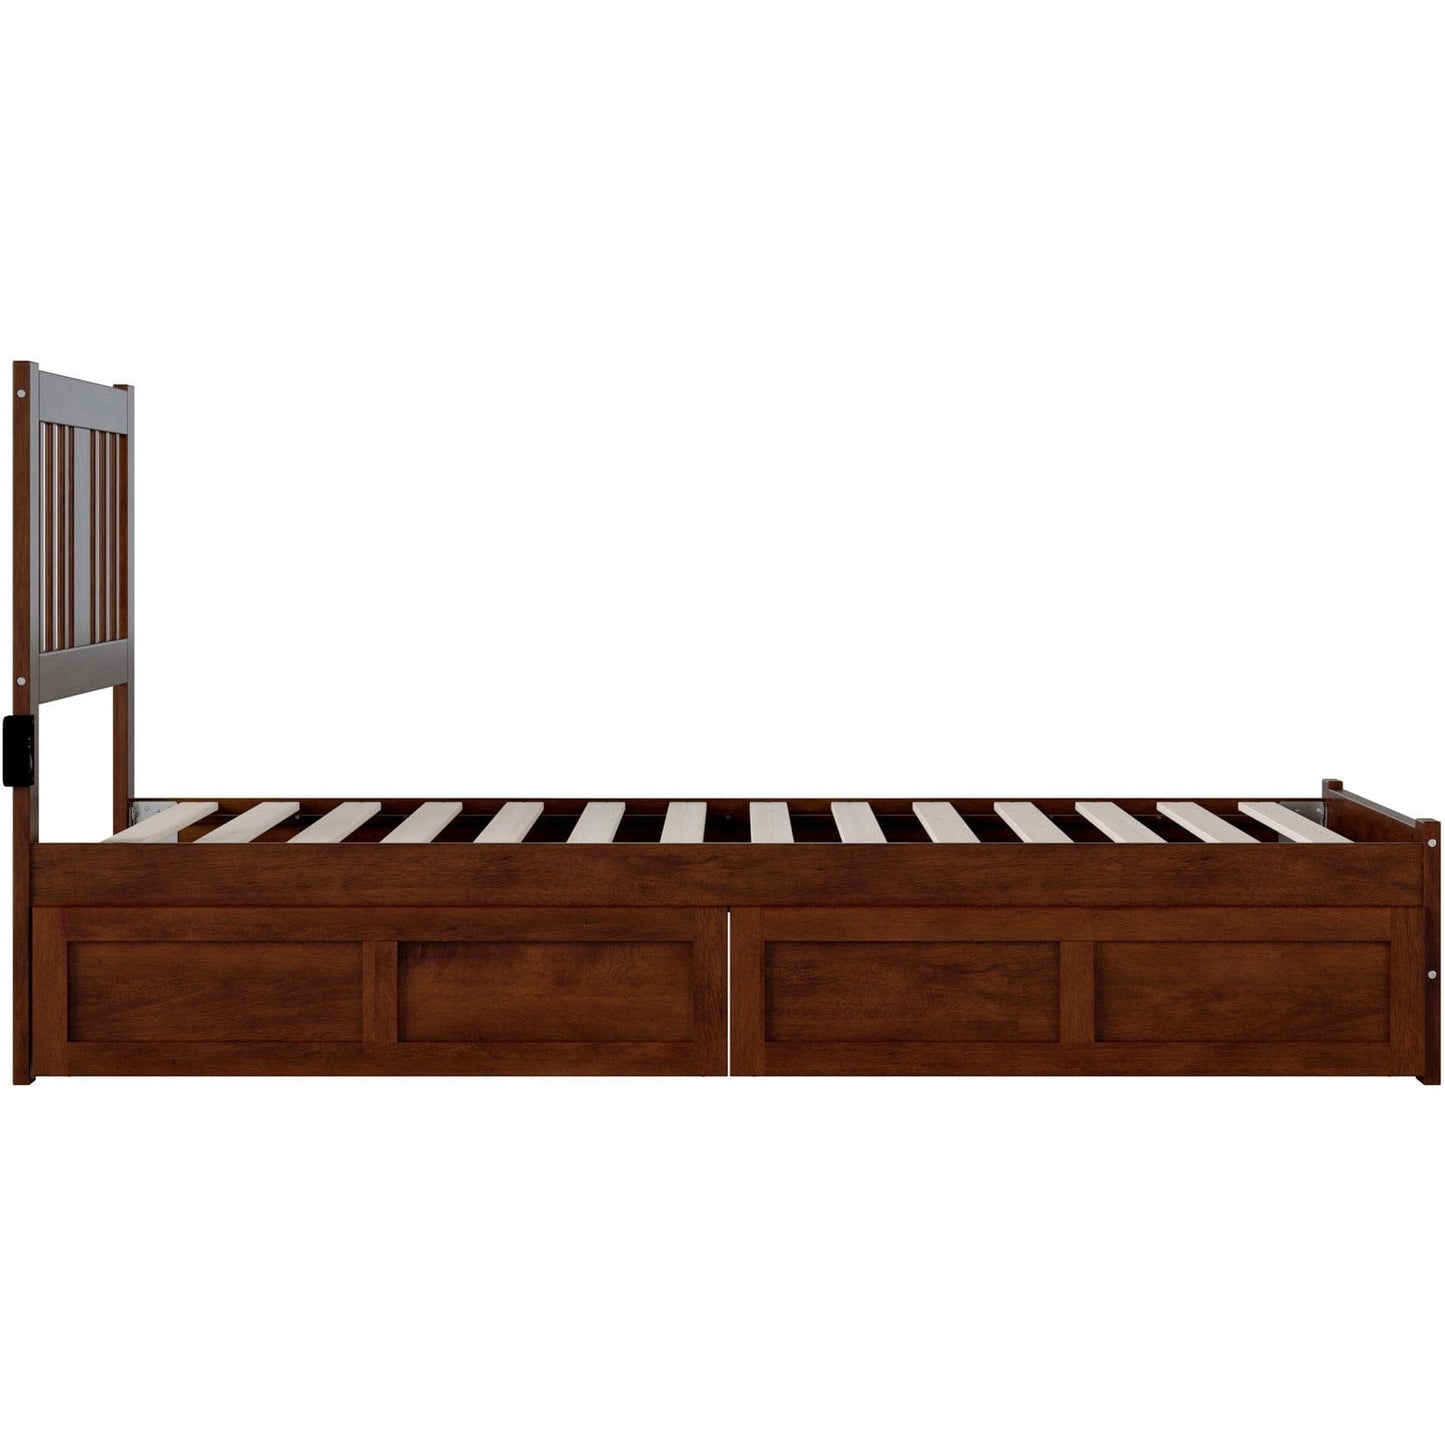 AFI Furnishings Tahoe Twin Extra Long Bed with Footboard and 2 Drawers in Walnut AG8963414